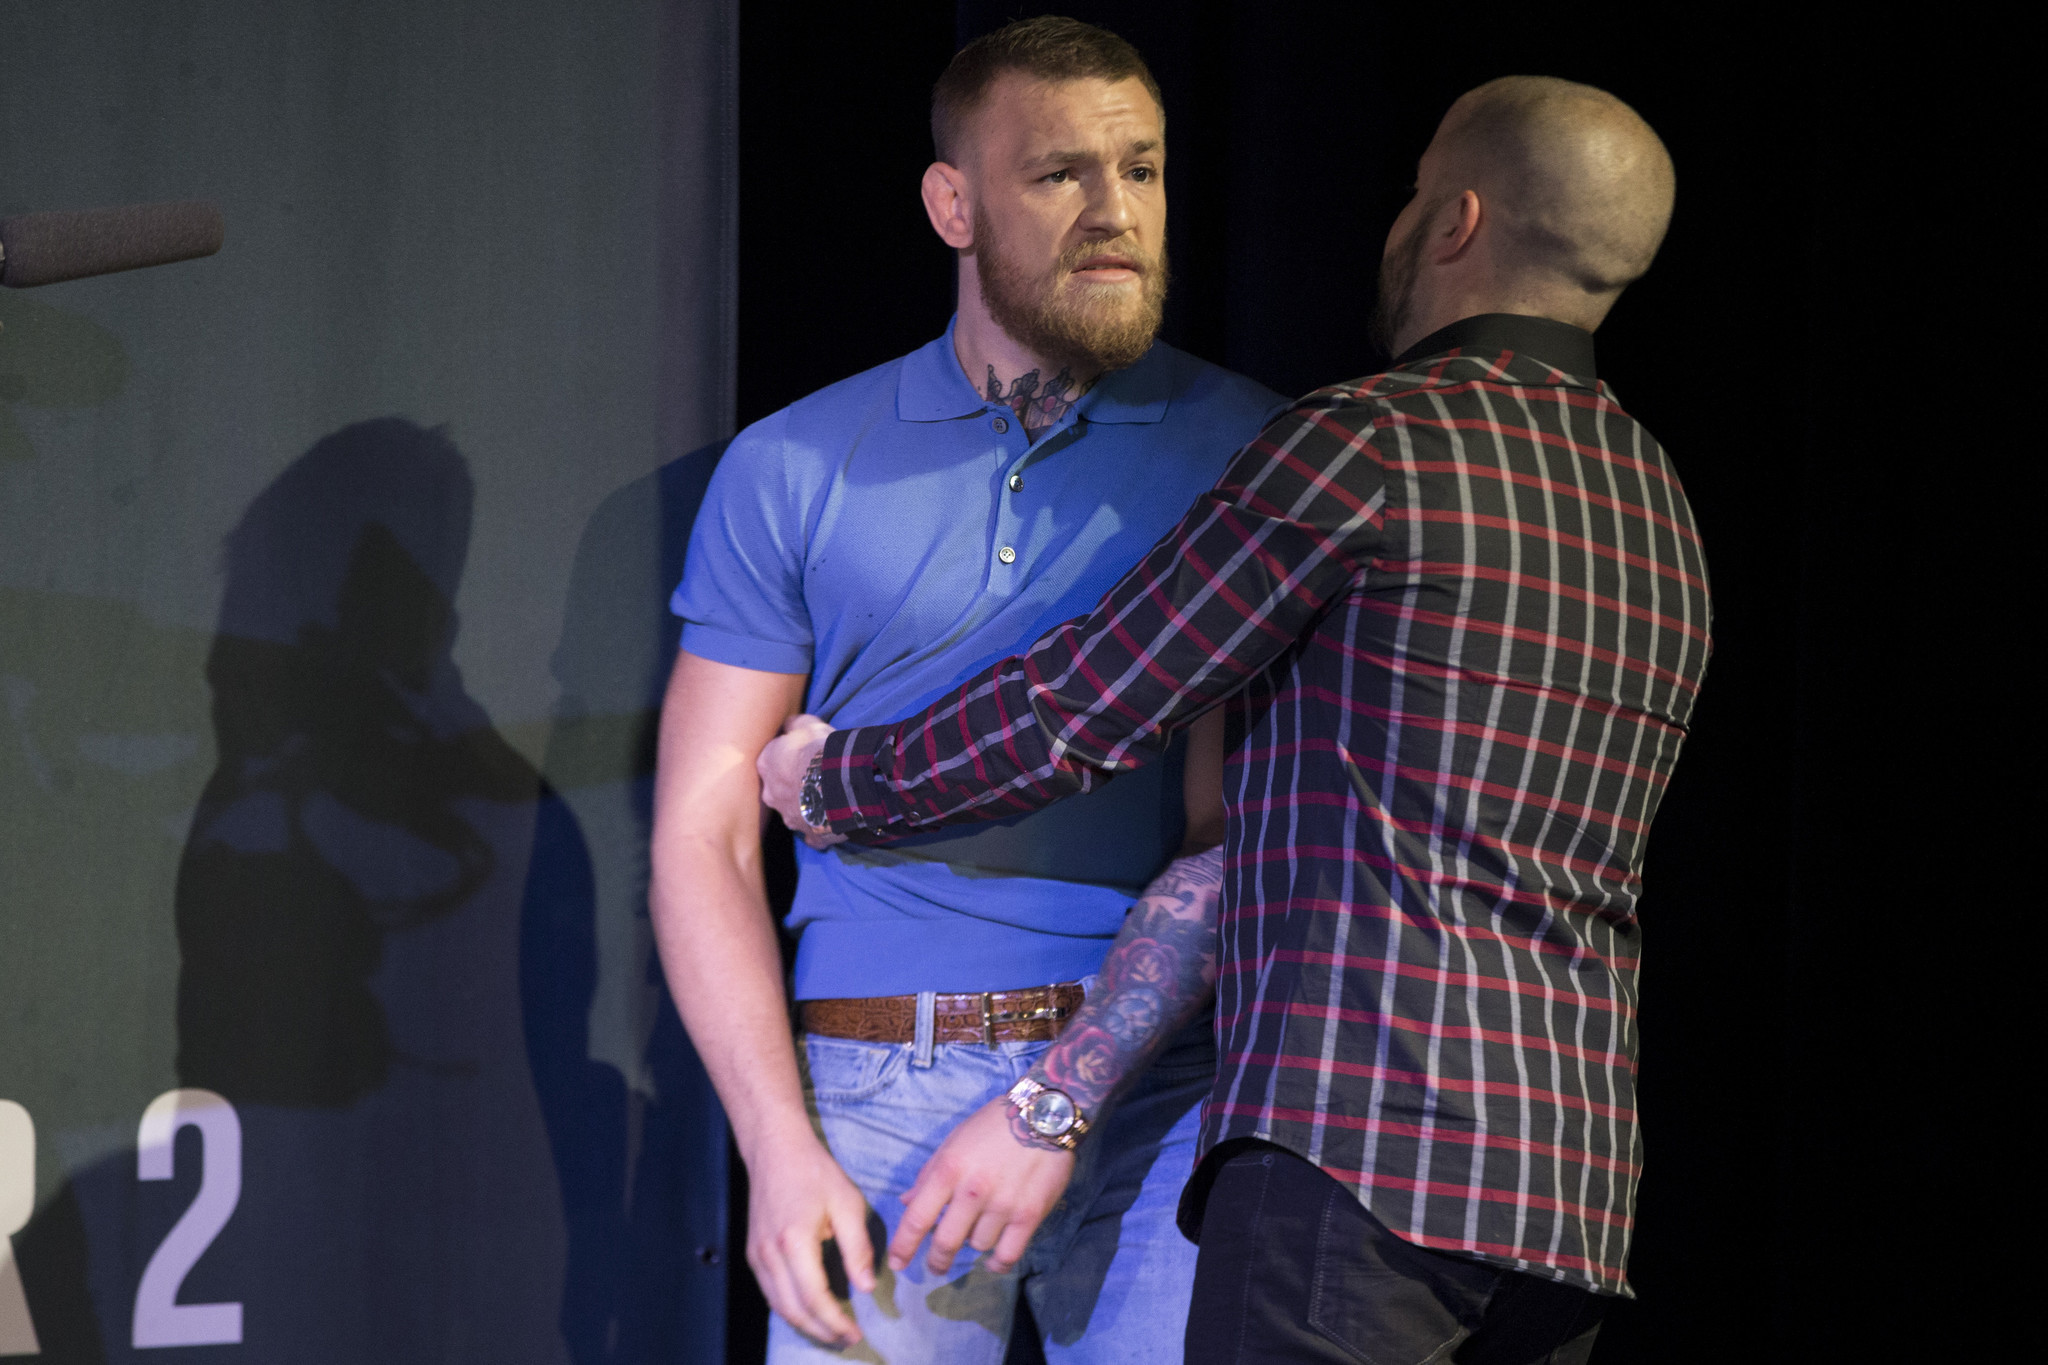 Conor McGregor hit by $150,000 fine for can-throwing exchange with Nate Diaz at UFC 202